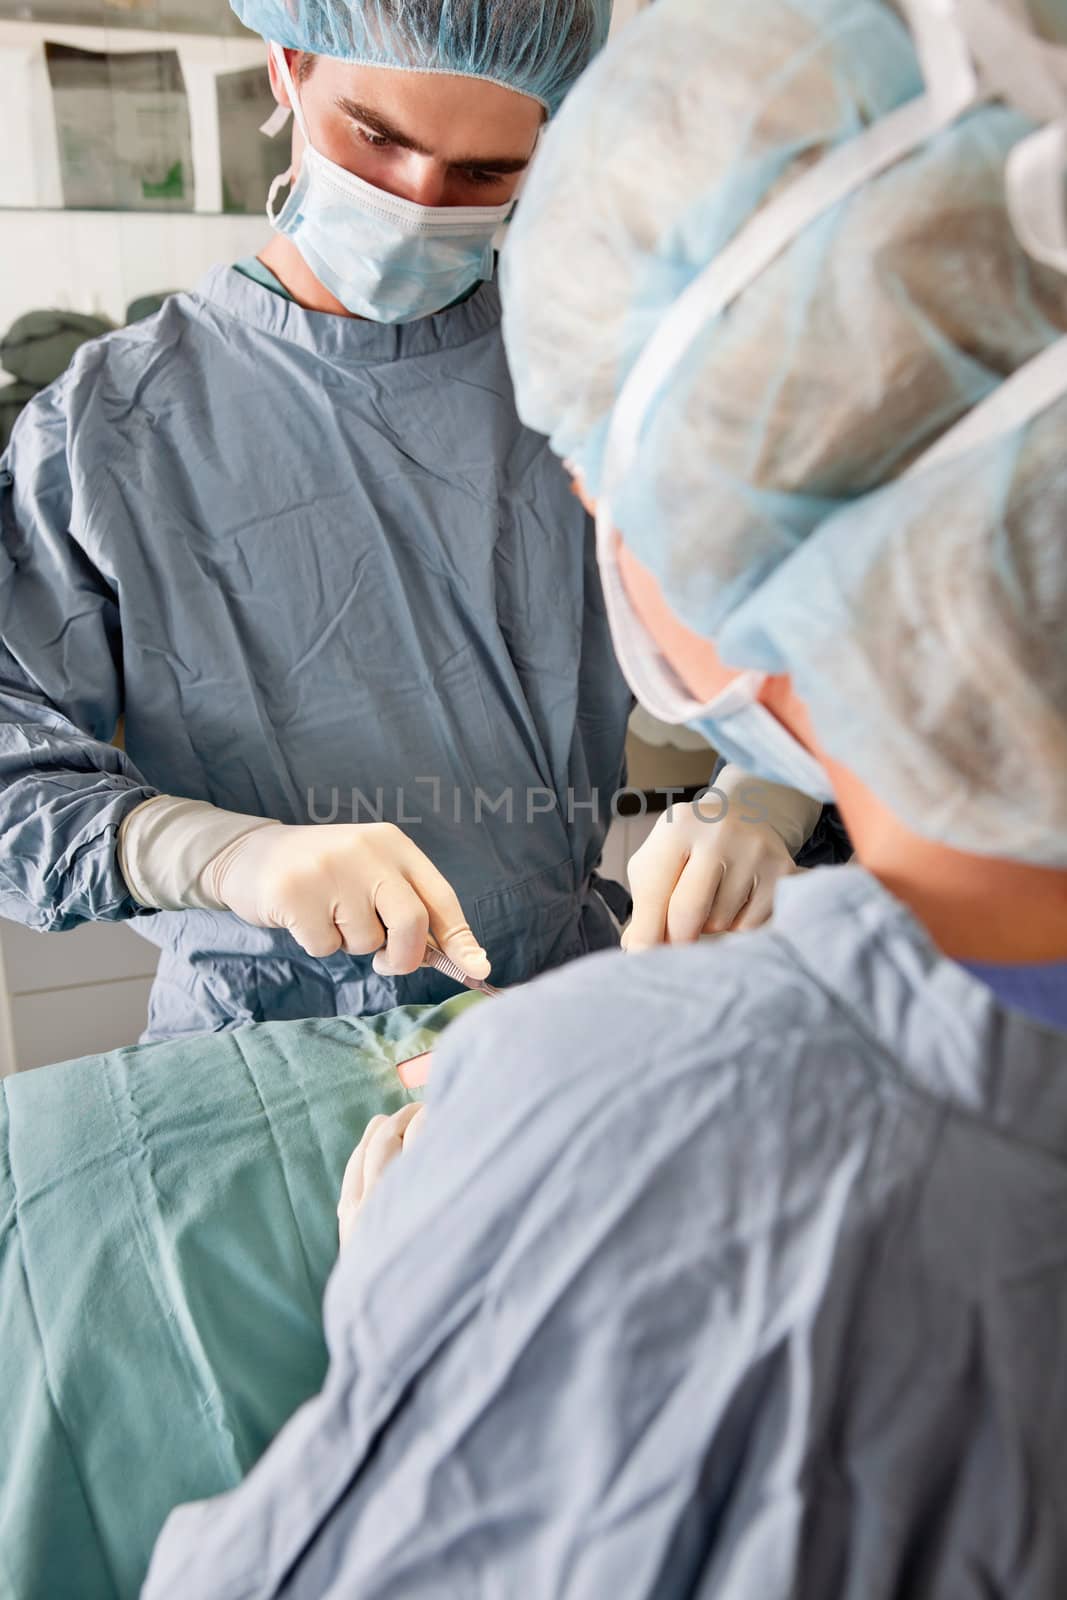 Surgeon with assistant performing operation